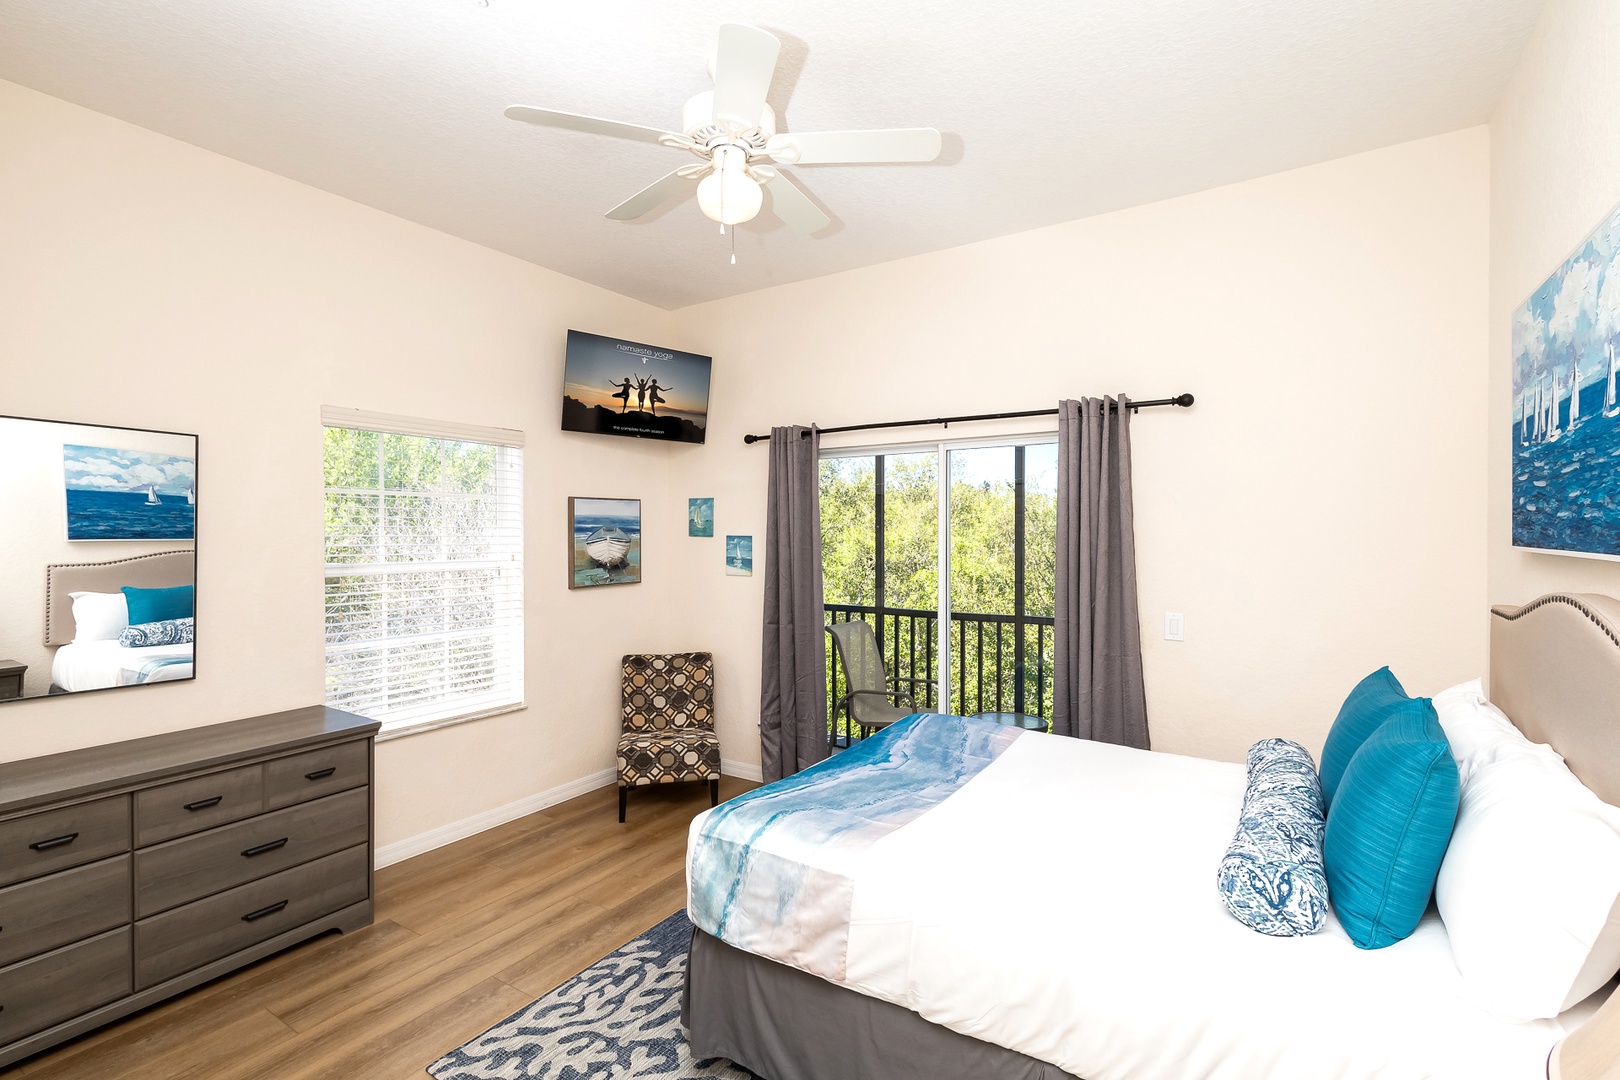 The 2nd bedroom offers a plush queen bed, balcony, Smart TV, & attached bath